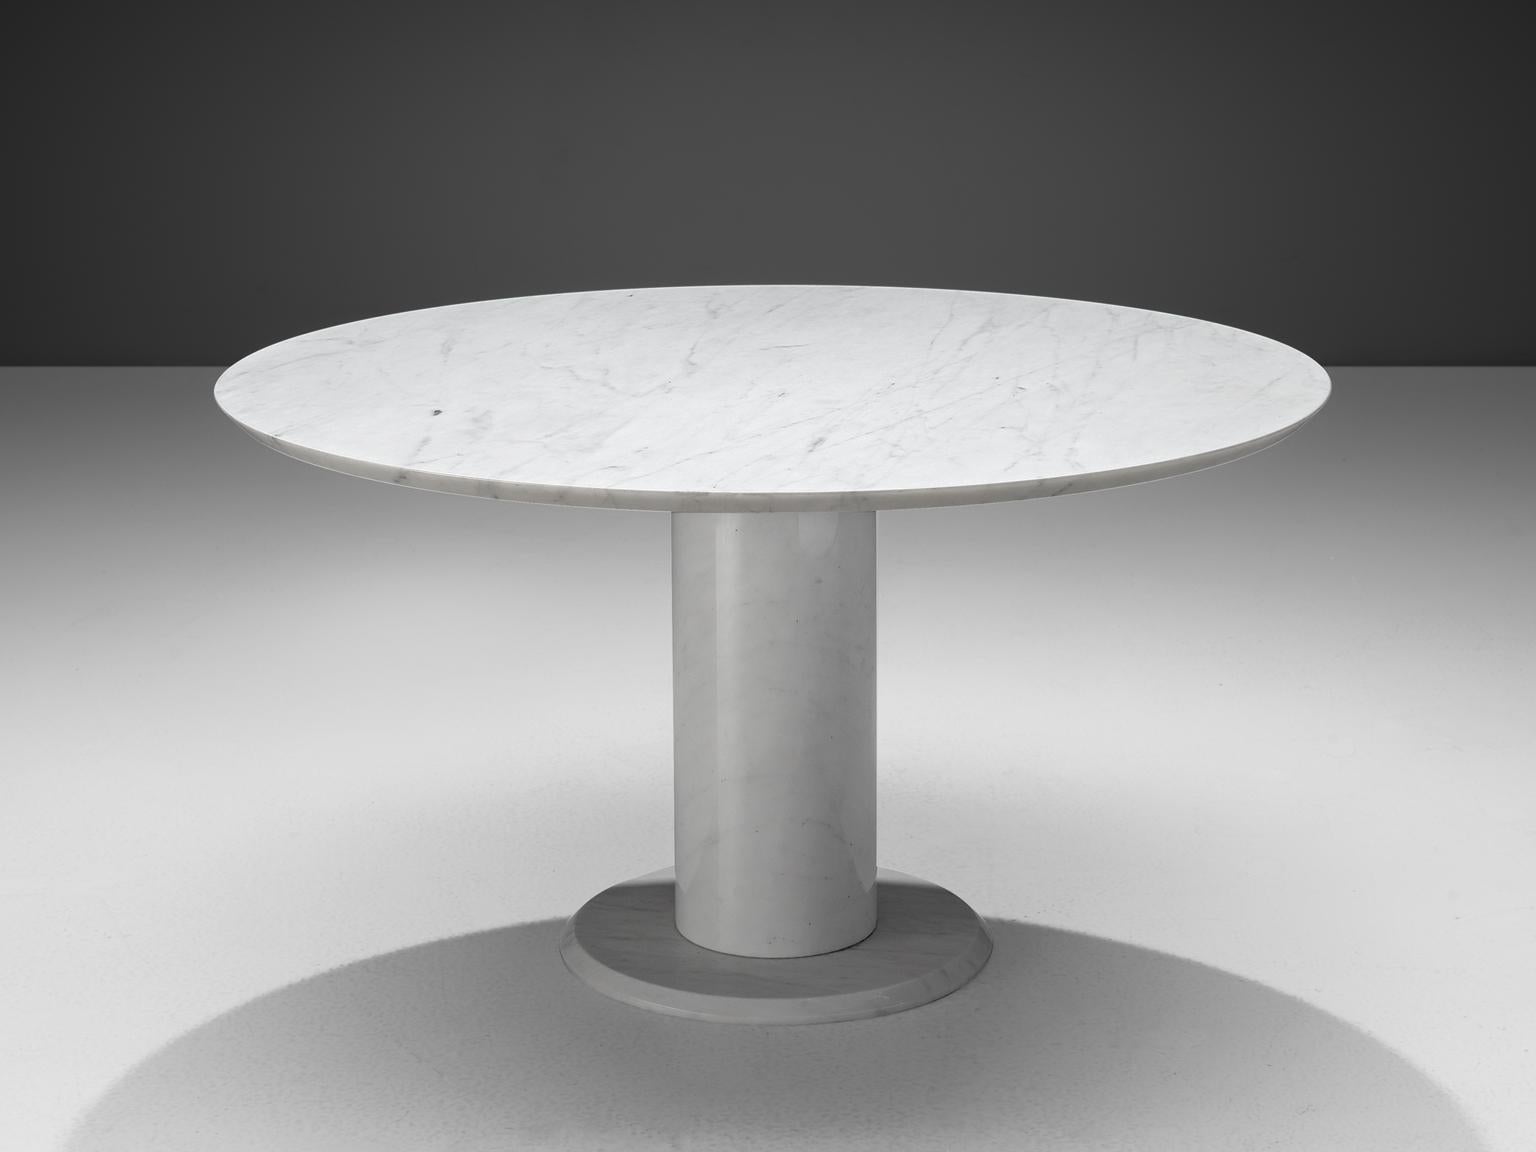 Round dining table, white Carrara marble, Italy, 1960s

Hailing from Italy during the vibrant 1960s, this round dining table crafted from exquisite white Carrara marble epitomizes the artistry and innovation of postmodern design. Its sleek